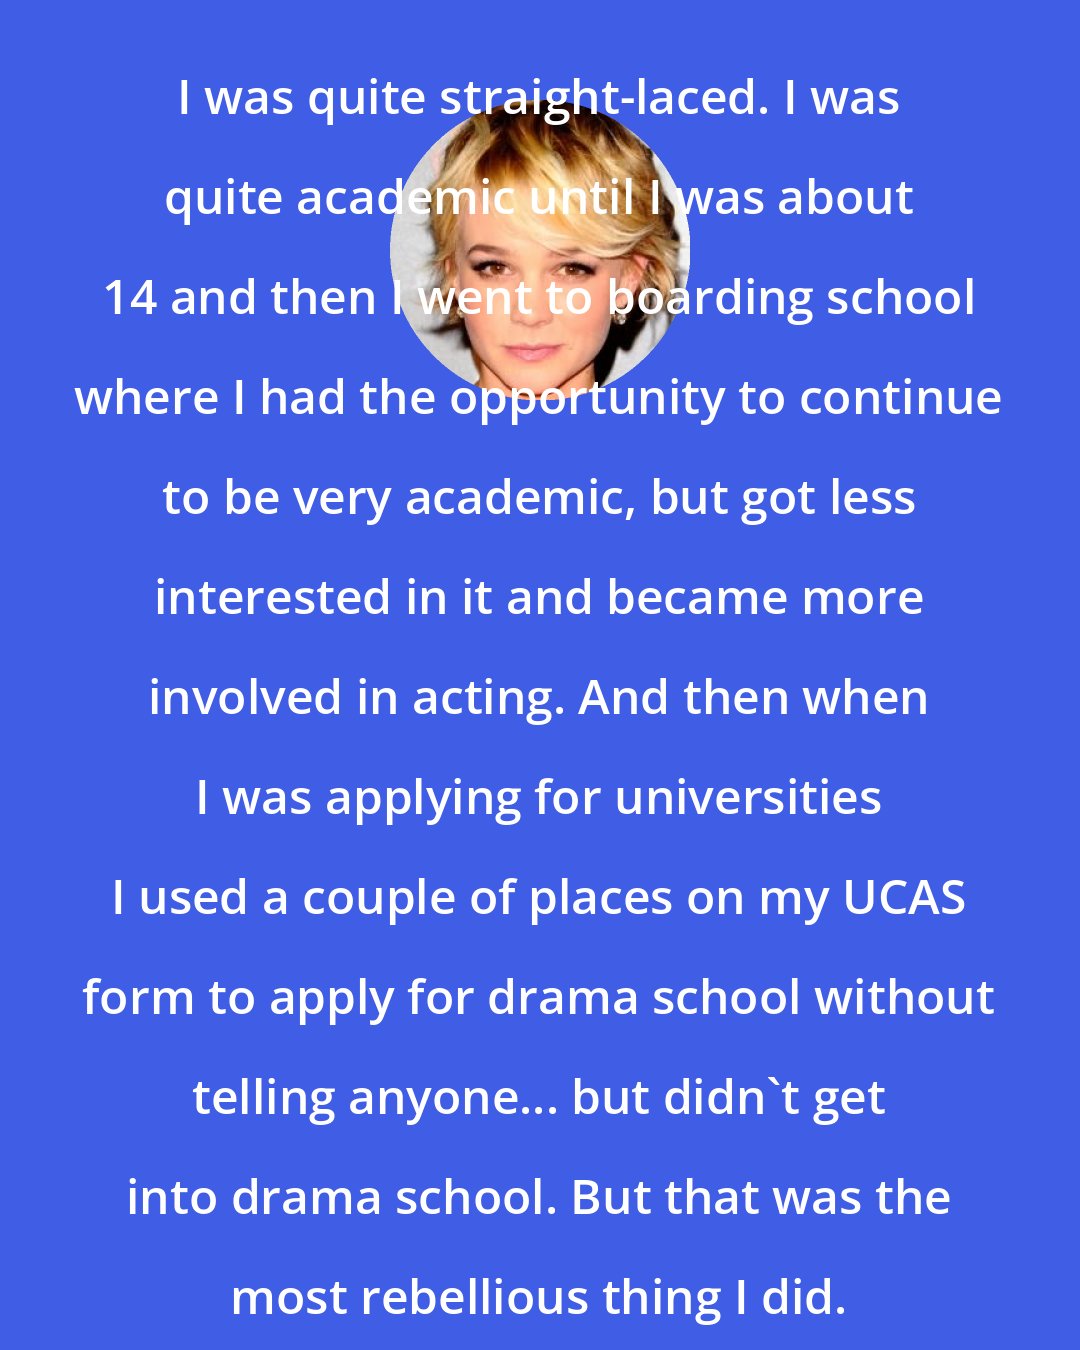 Carey Mulligan: I was quite straight-laced. I was quite academic until I was about 14 and then I went to boarding school where I had the opportunity to continue to be very academic, but got less interested in it and became more involved in acting. And then when I was applying for universities I used a couple of places on my UCAS form to apply for drama school without telling anyone... but didn't get into drama school. But that was the most rebellious thing I did.